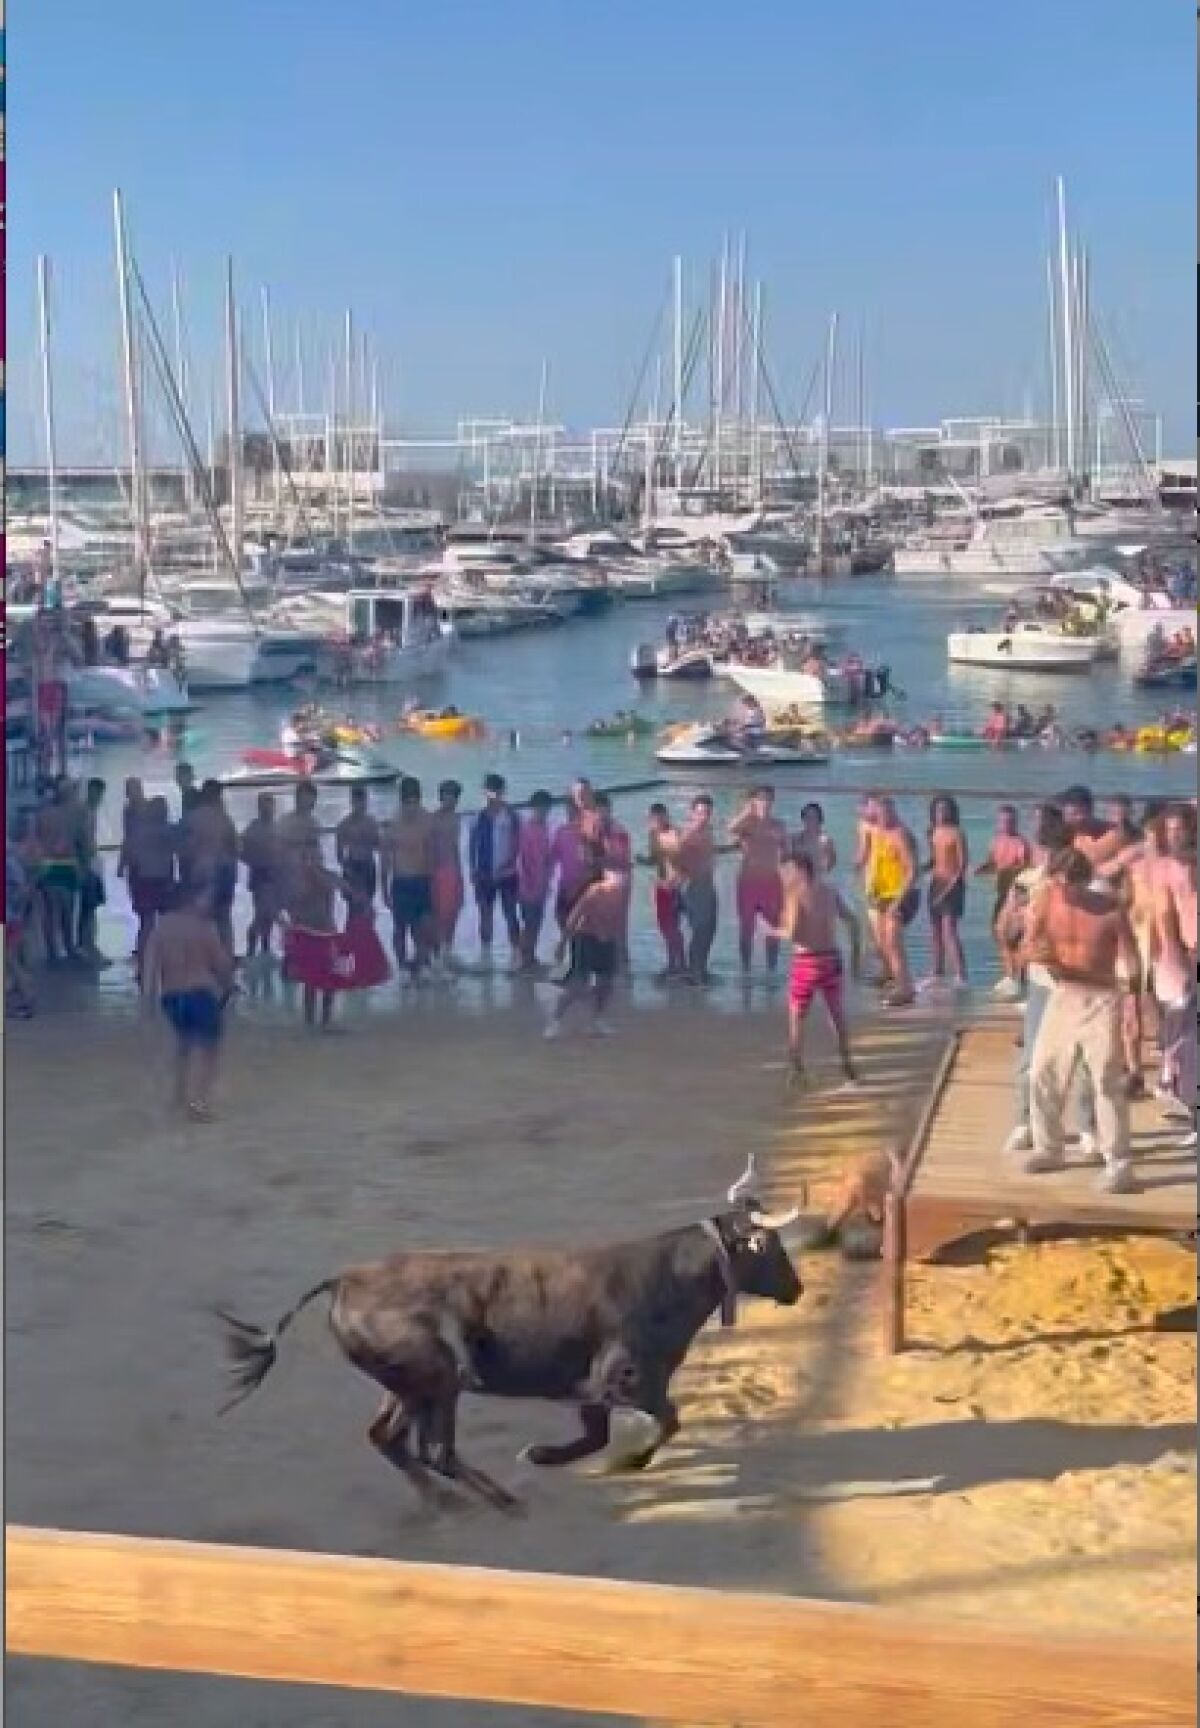 A bull runs in the arena at the Bulls in the Sea event in Dénia, Spain.